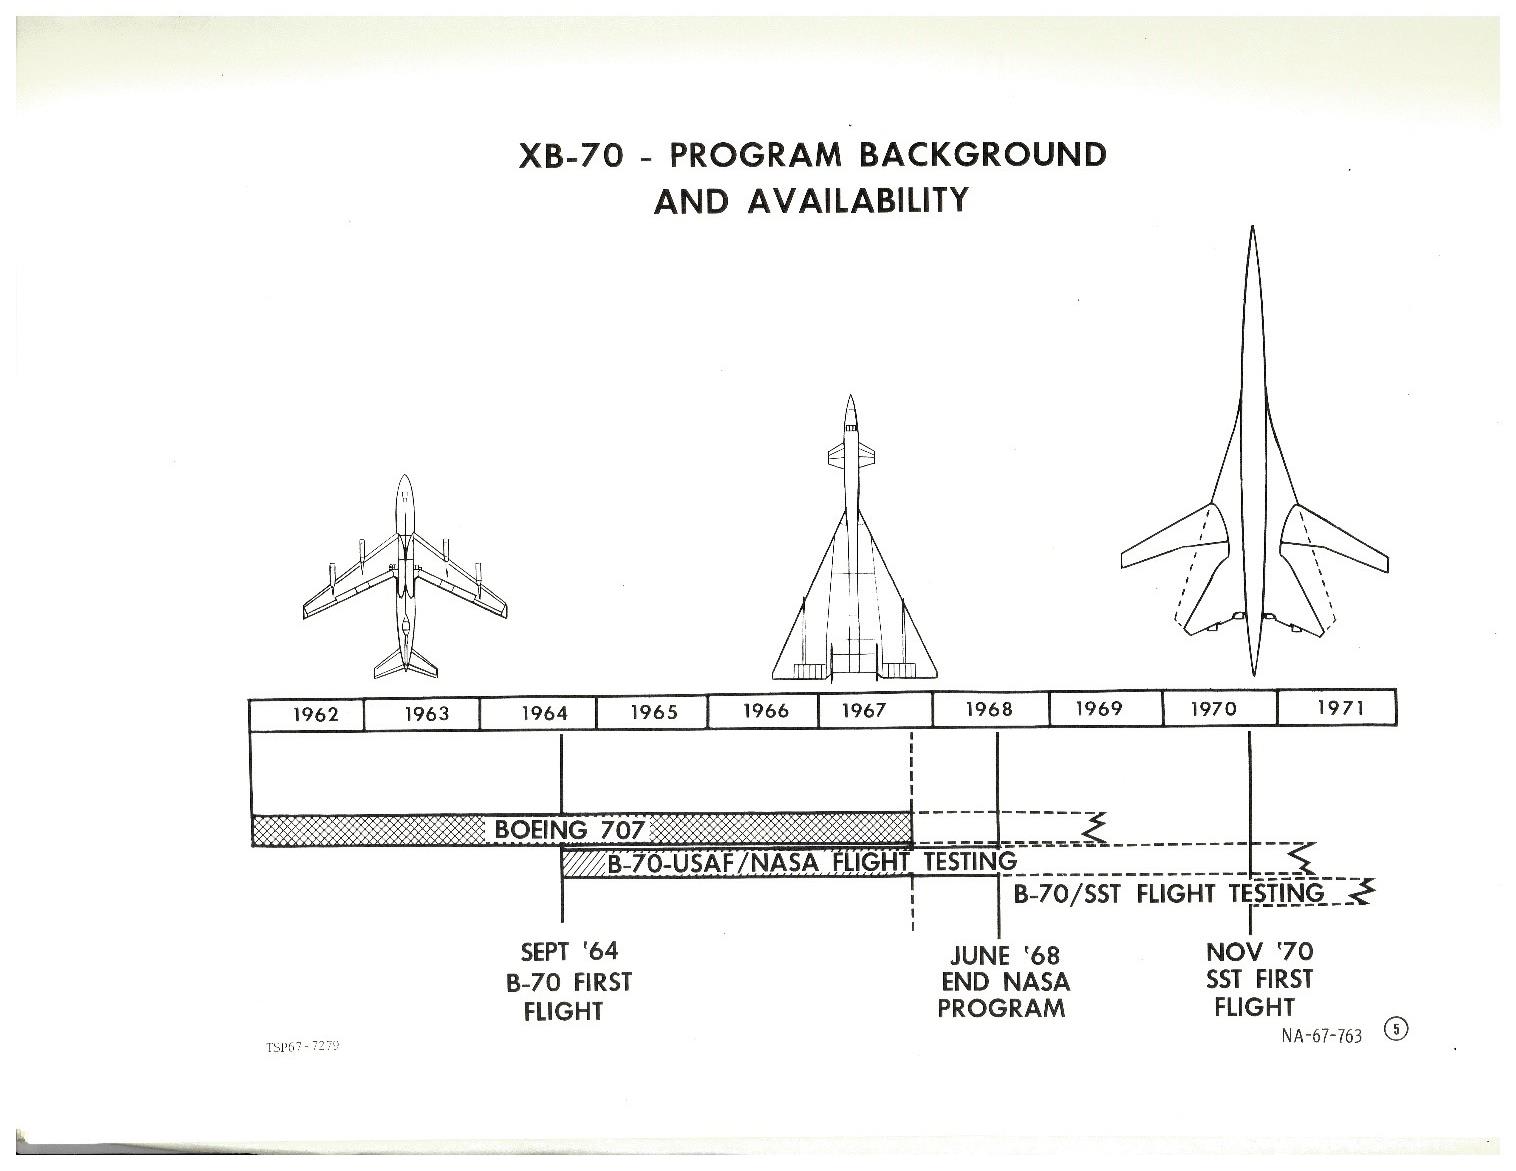 illustration showing background programs to develop the XB-70